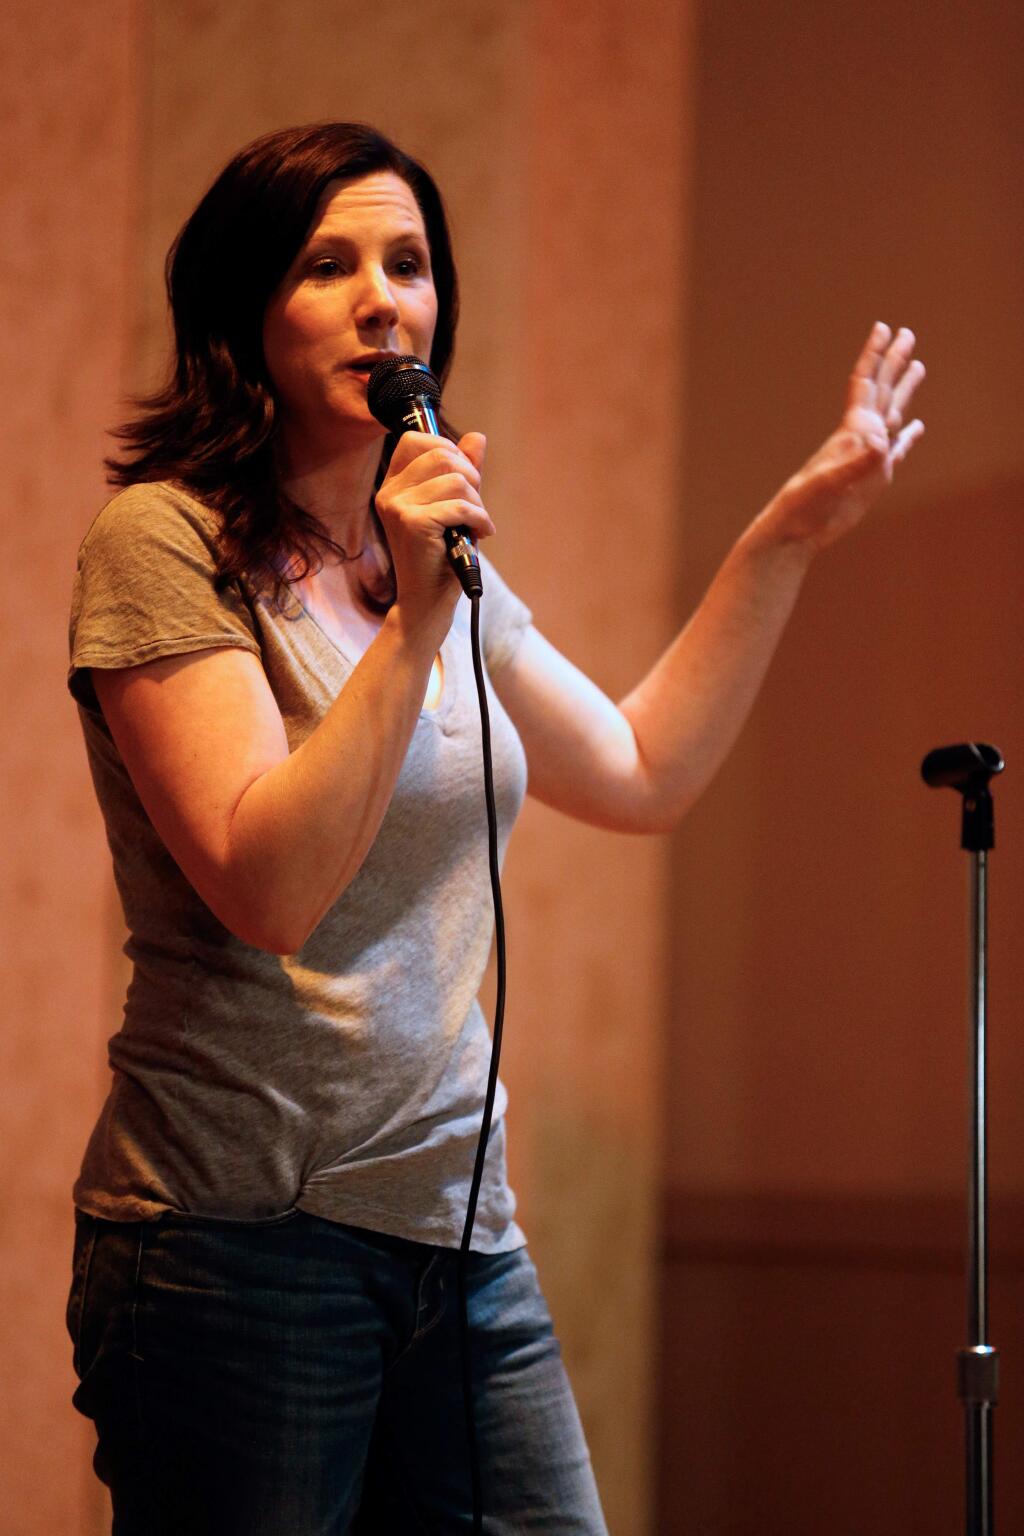 Comedian Jill Maragos goes through her routine during a fundraiser for She Can, a new nonprofit resource for pregnant and parenting teens, in Santa Rosa, California on Friday, April 8, 2016. (Alvin Jornada / The Press Democrat)